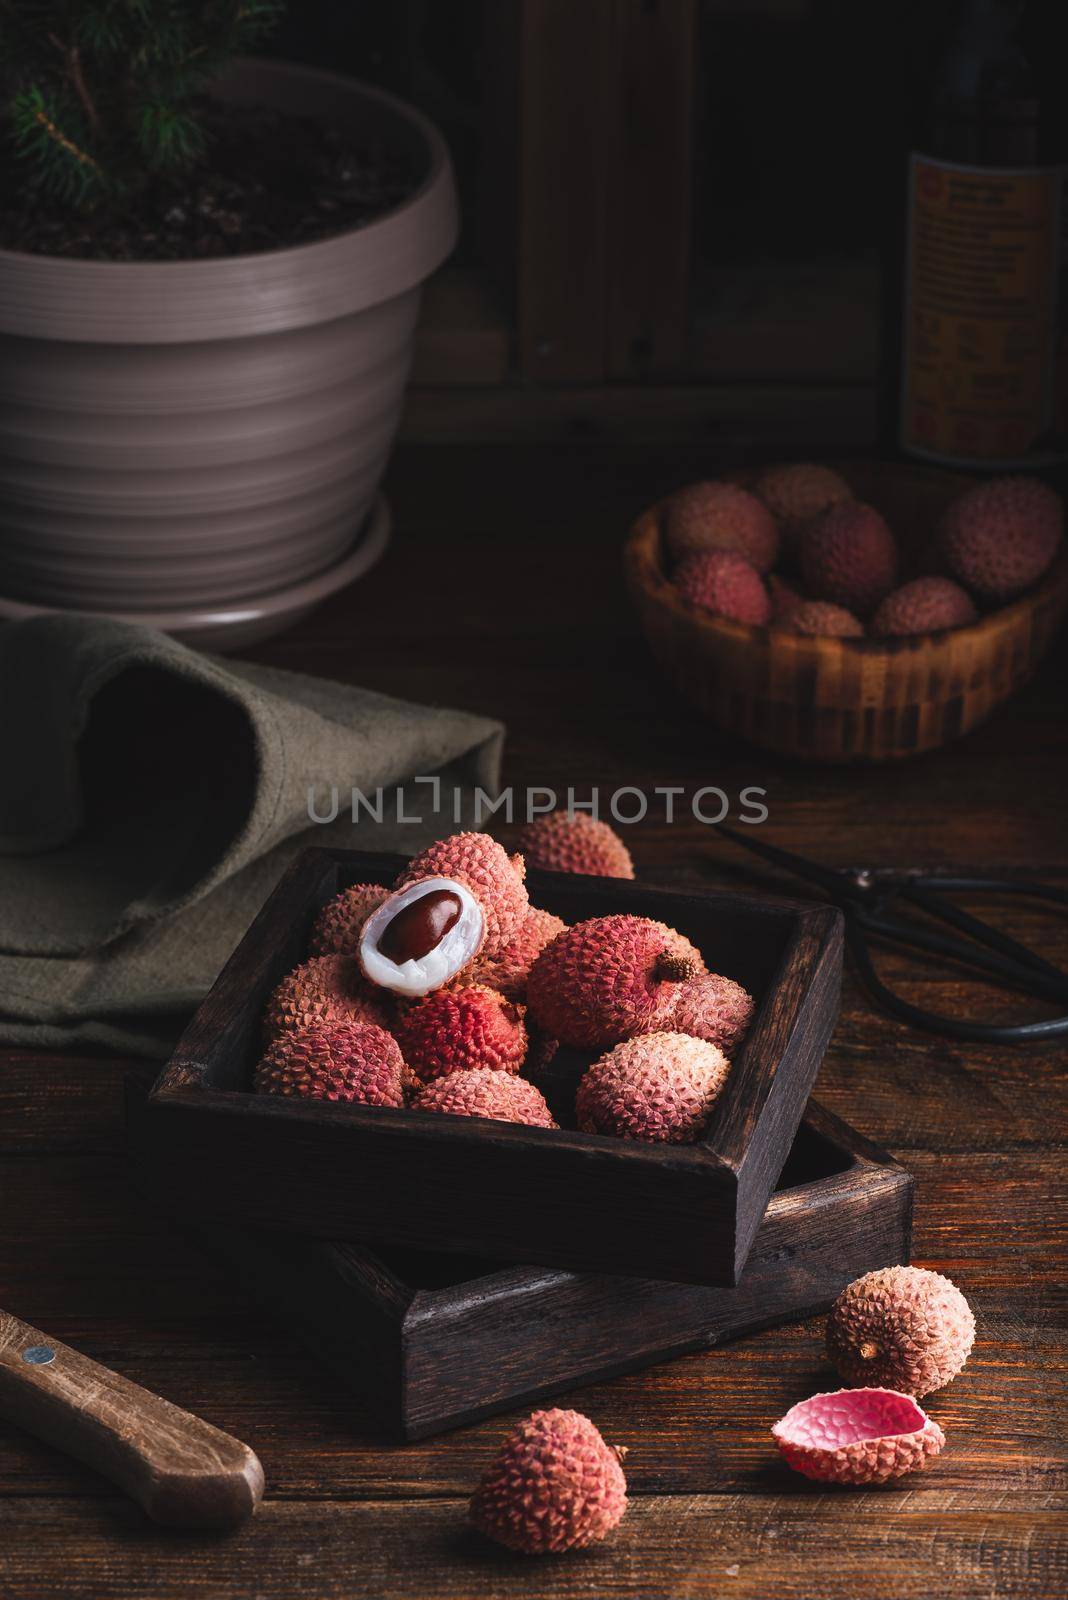 Delicious Lychee Fruits in Rustic Box by Seva_blsv